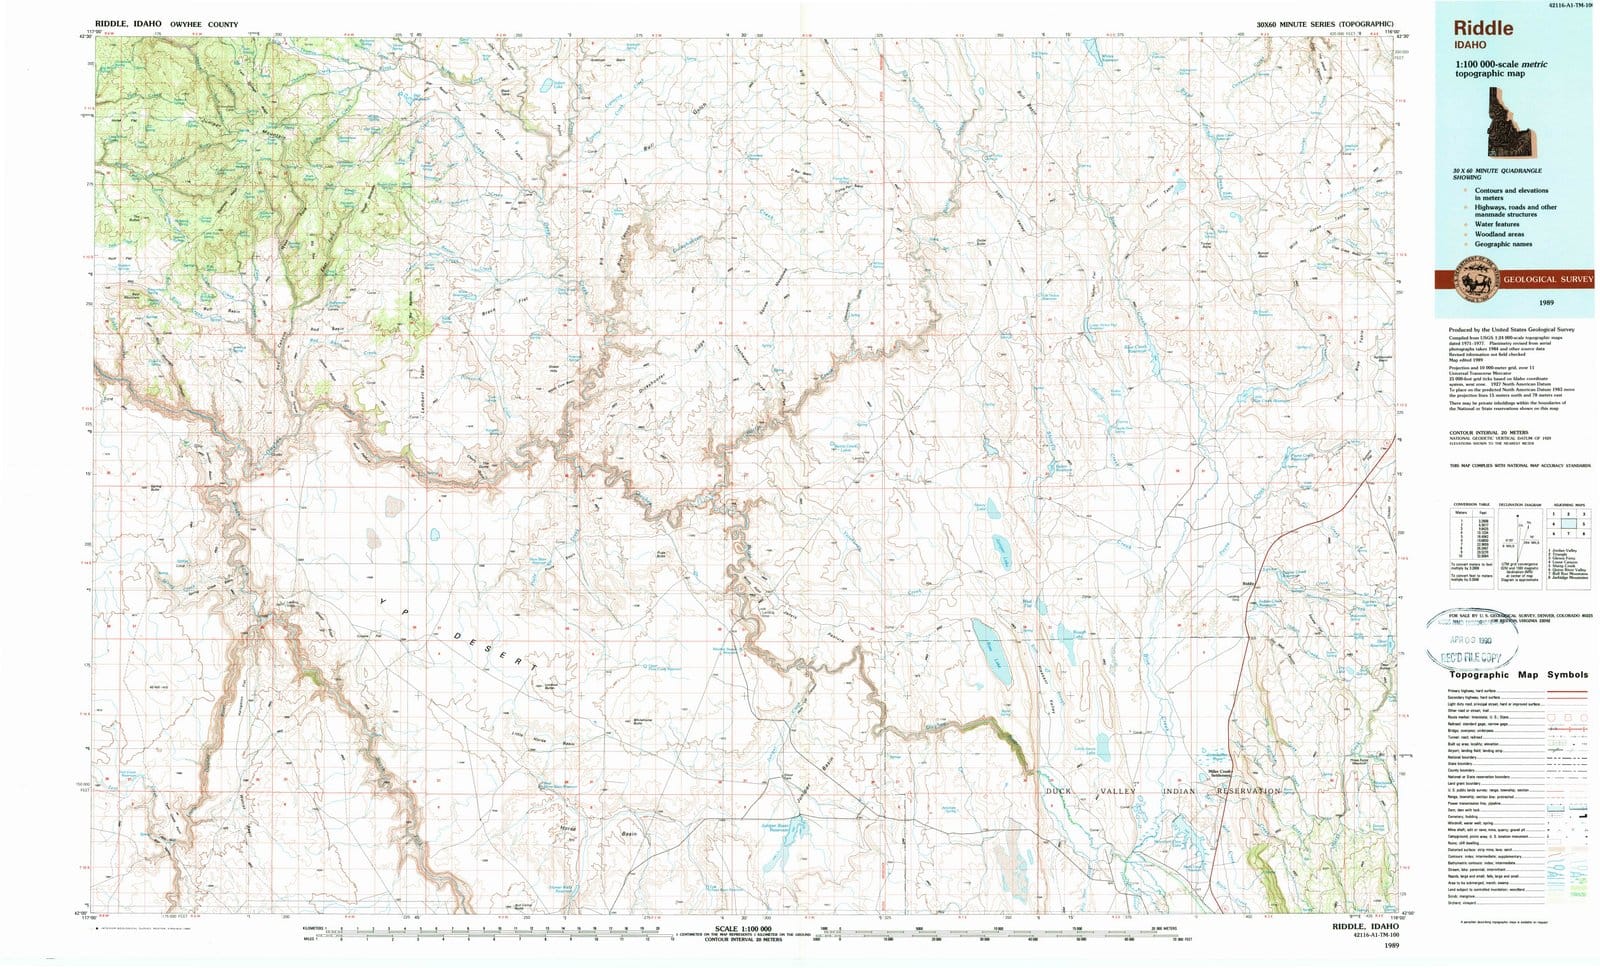 1989 Riddle, ID - Idaho - USGS Topographic Map